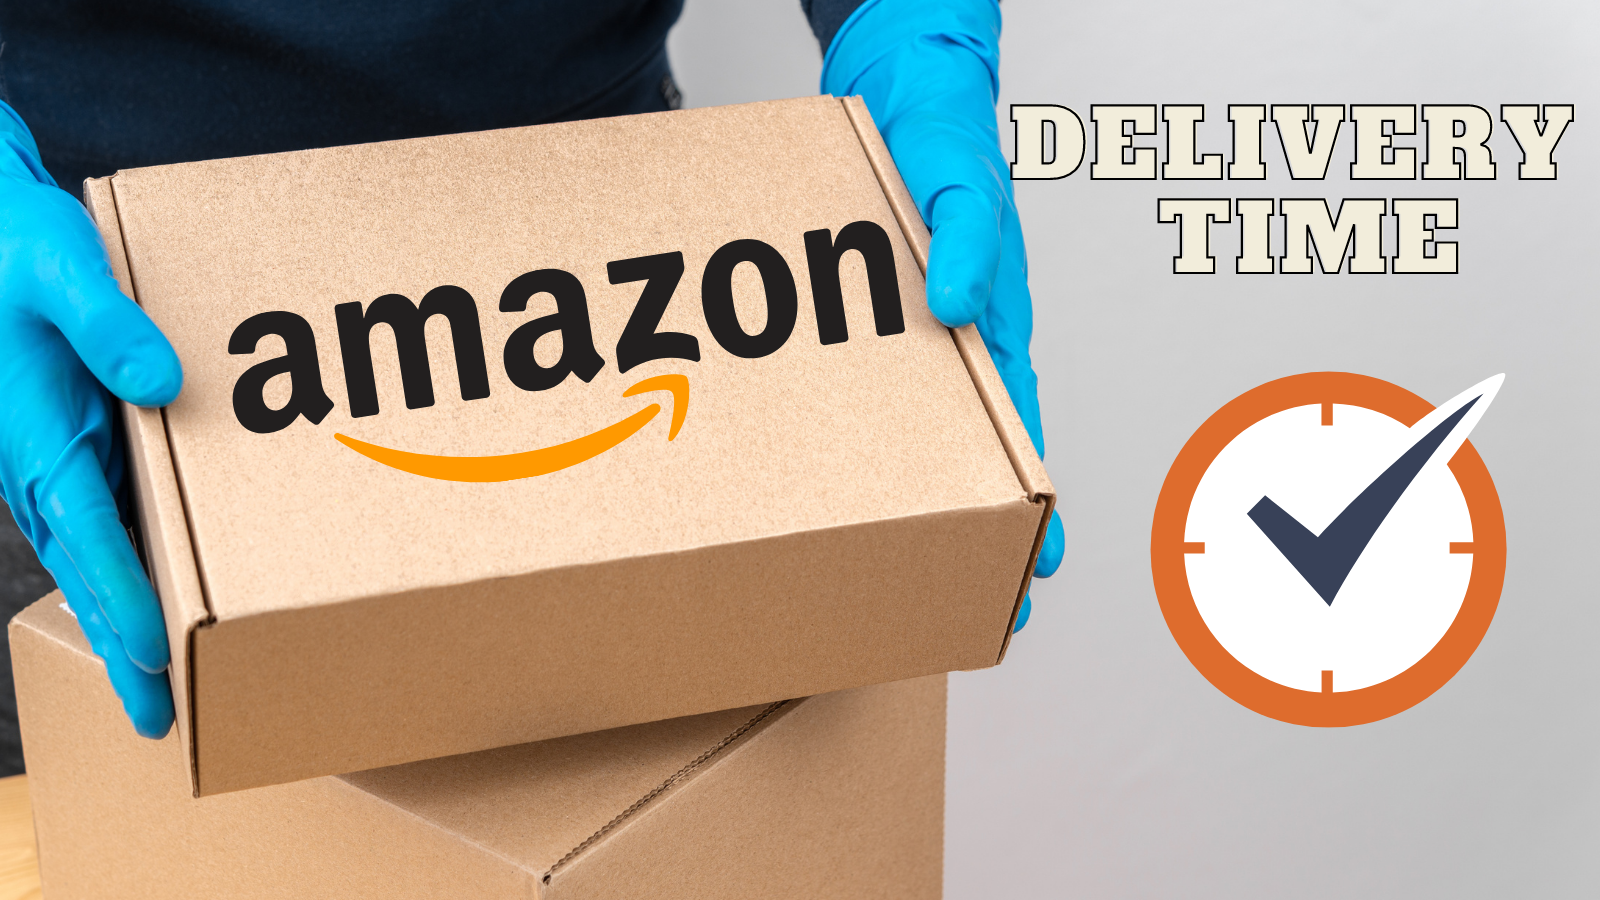 What Time Does Amazon Deliver in 2022?